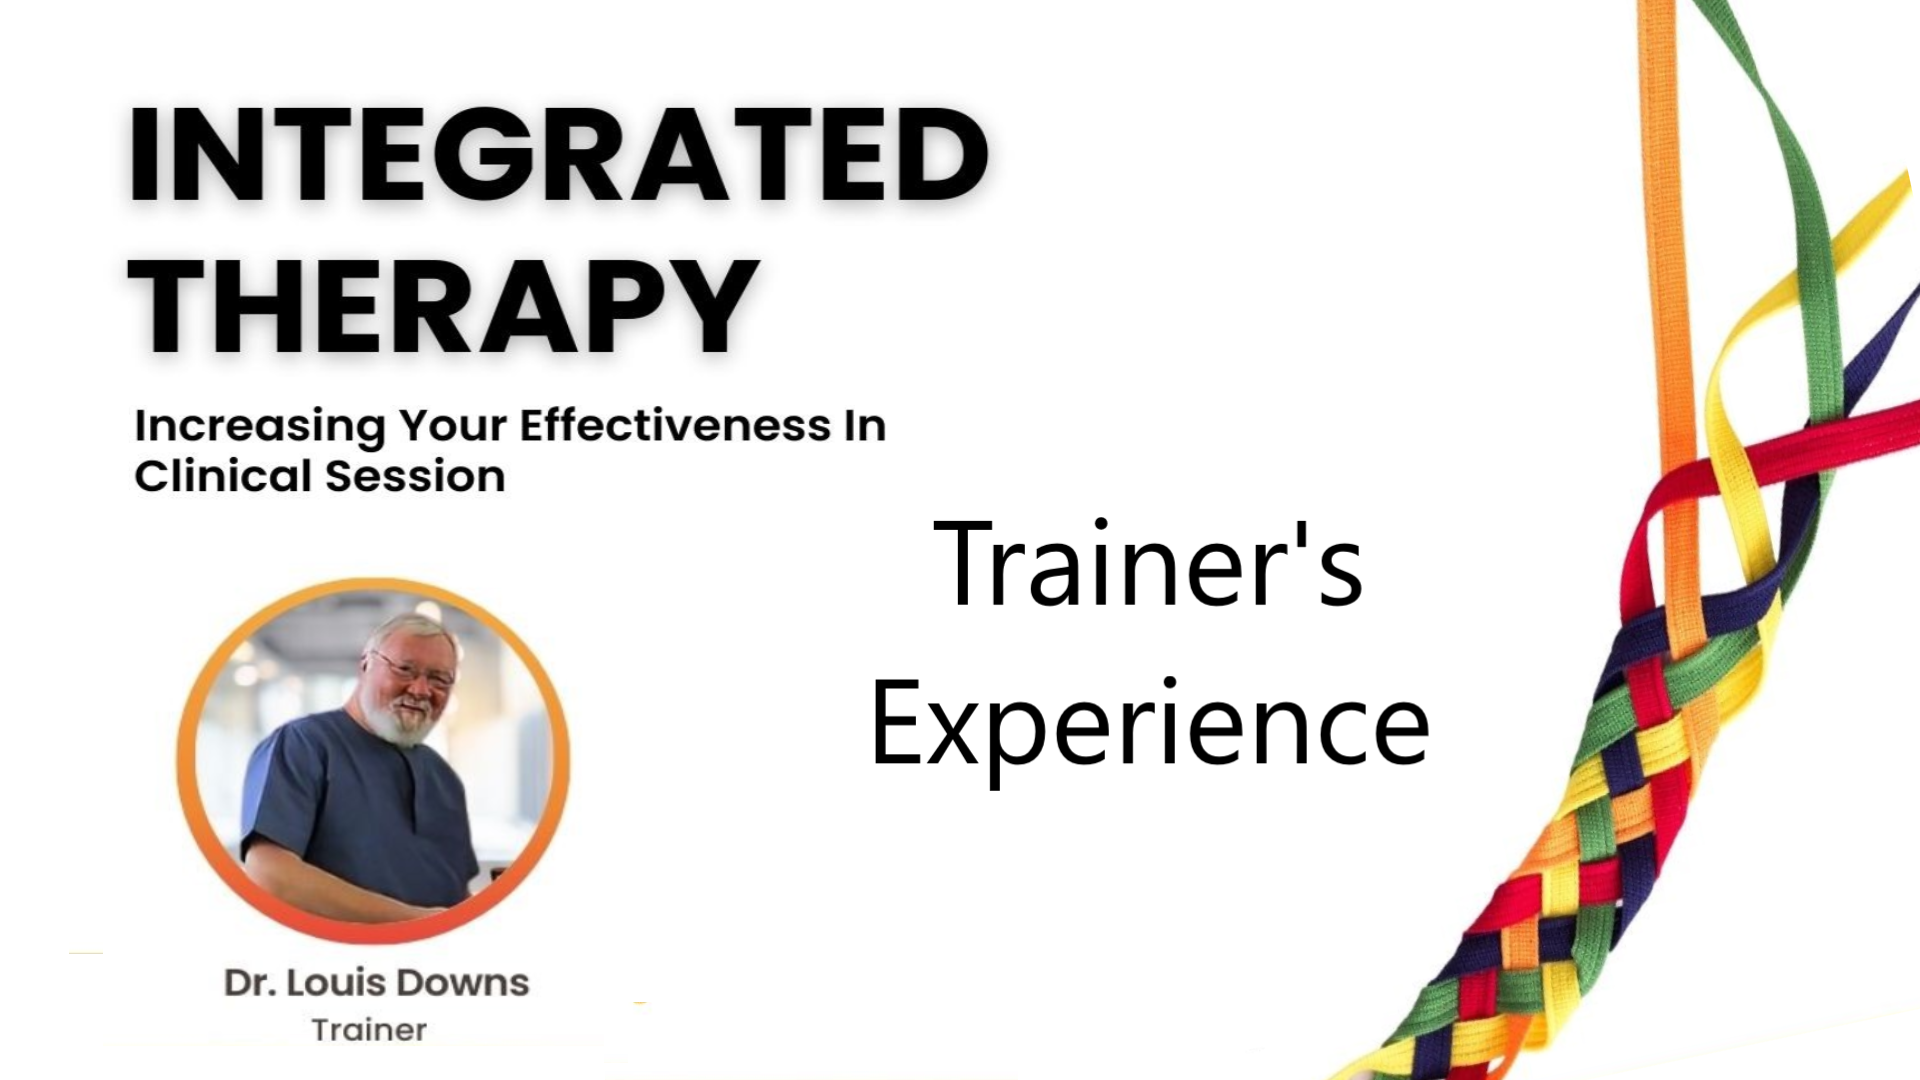 Trainer's experience with Integrated therapy